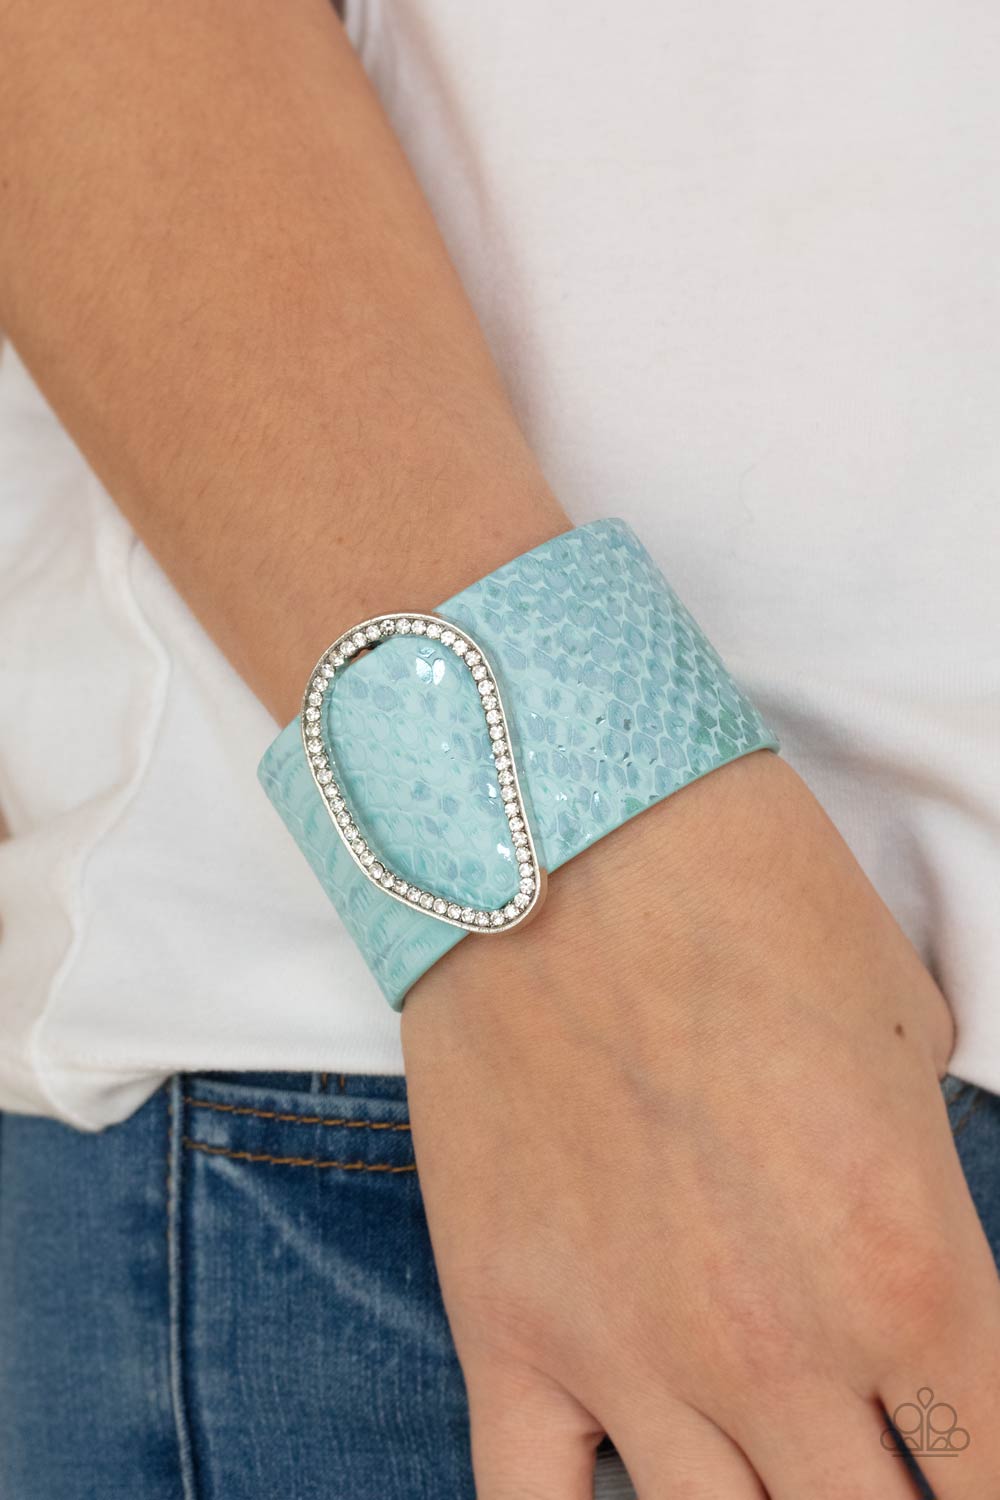 HISS-tory In The Making - Blue wrap bracelet